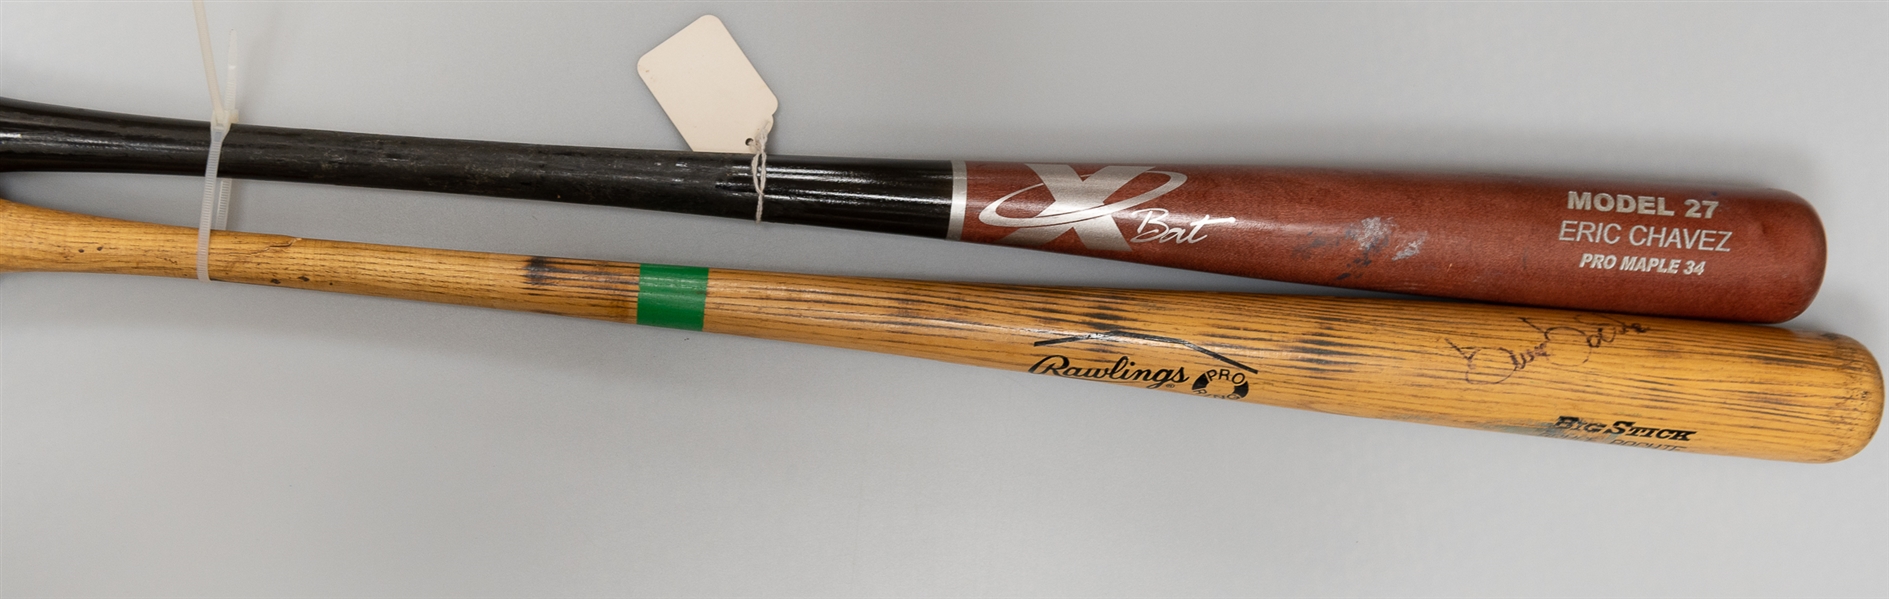 Lot of (2) Official MLB Bats Possibly Game/Practice Used Bruce Bochte and Eric Chavez